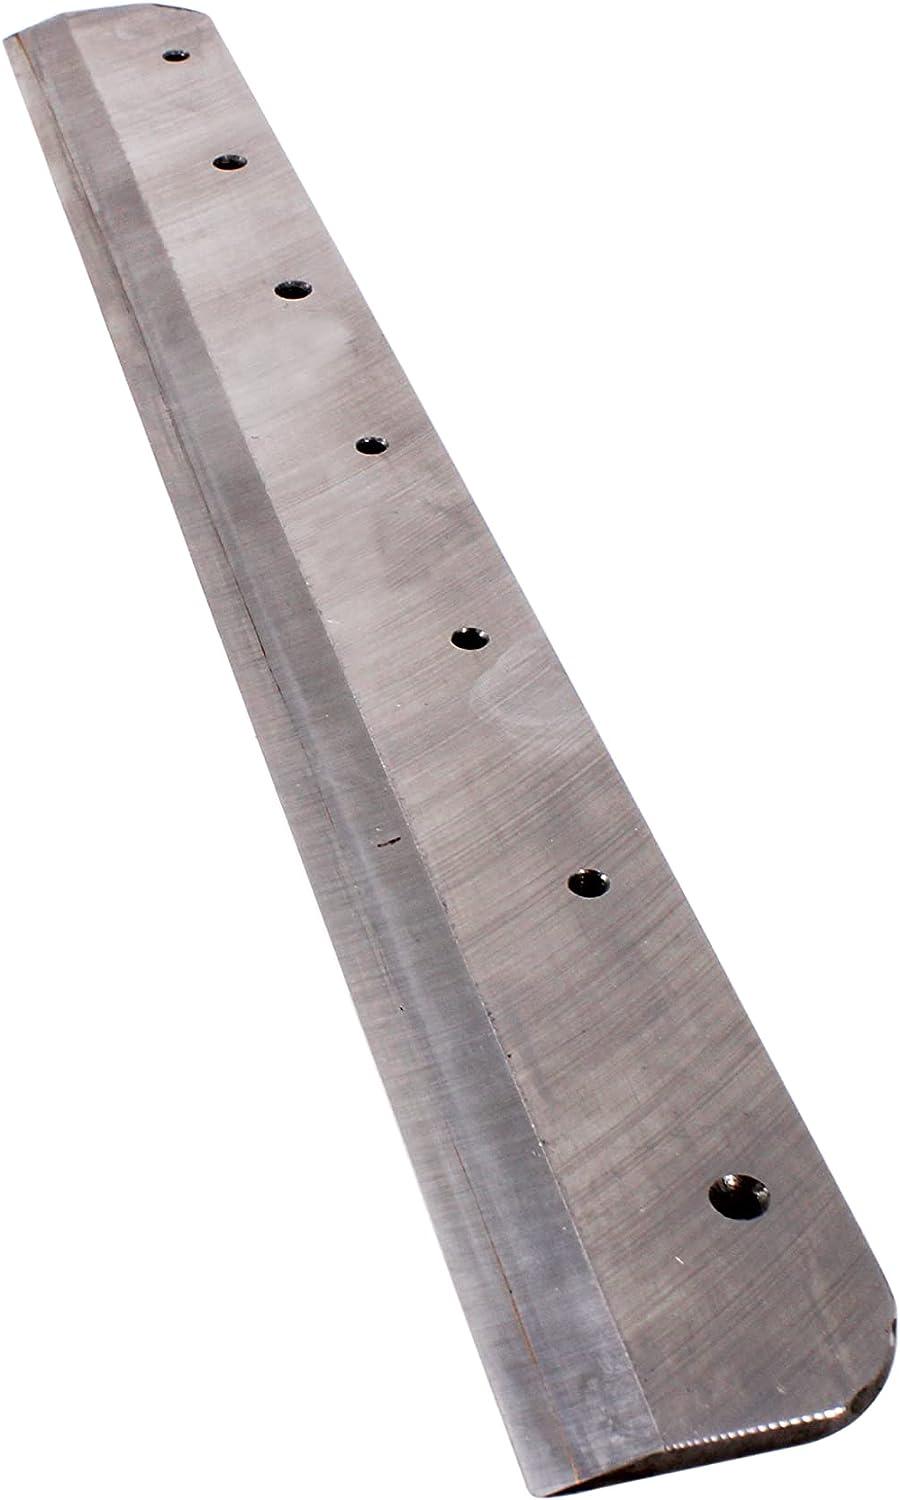 HFS (R) Paper Cutter Blade for HFS 12'' Heavy Duty Guillotine A4 Paper  Cutter